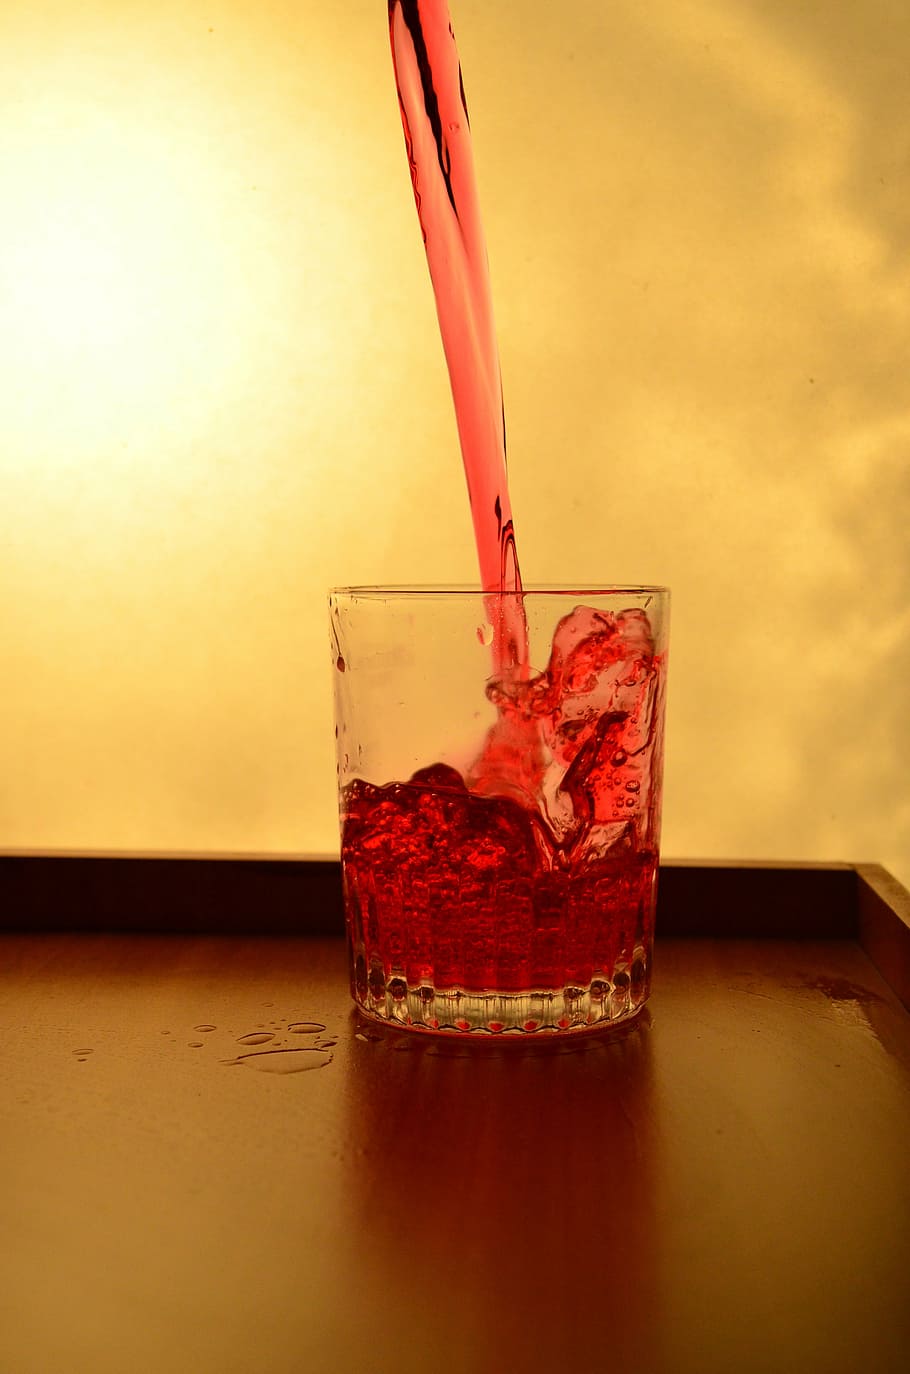 splash, glass, liquid, red, pouring, alcohol, drink, beverage, fill, refreshment